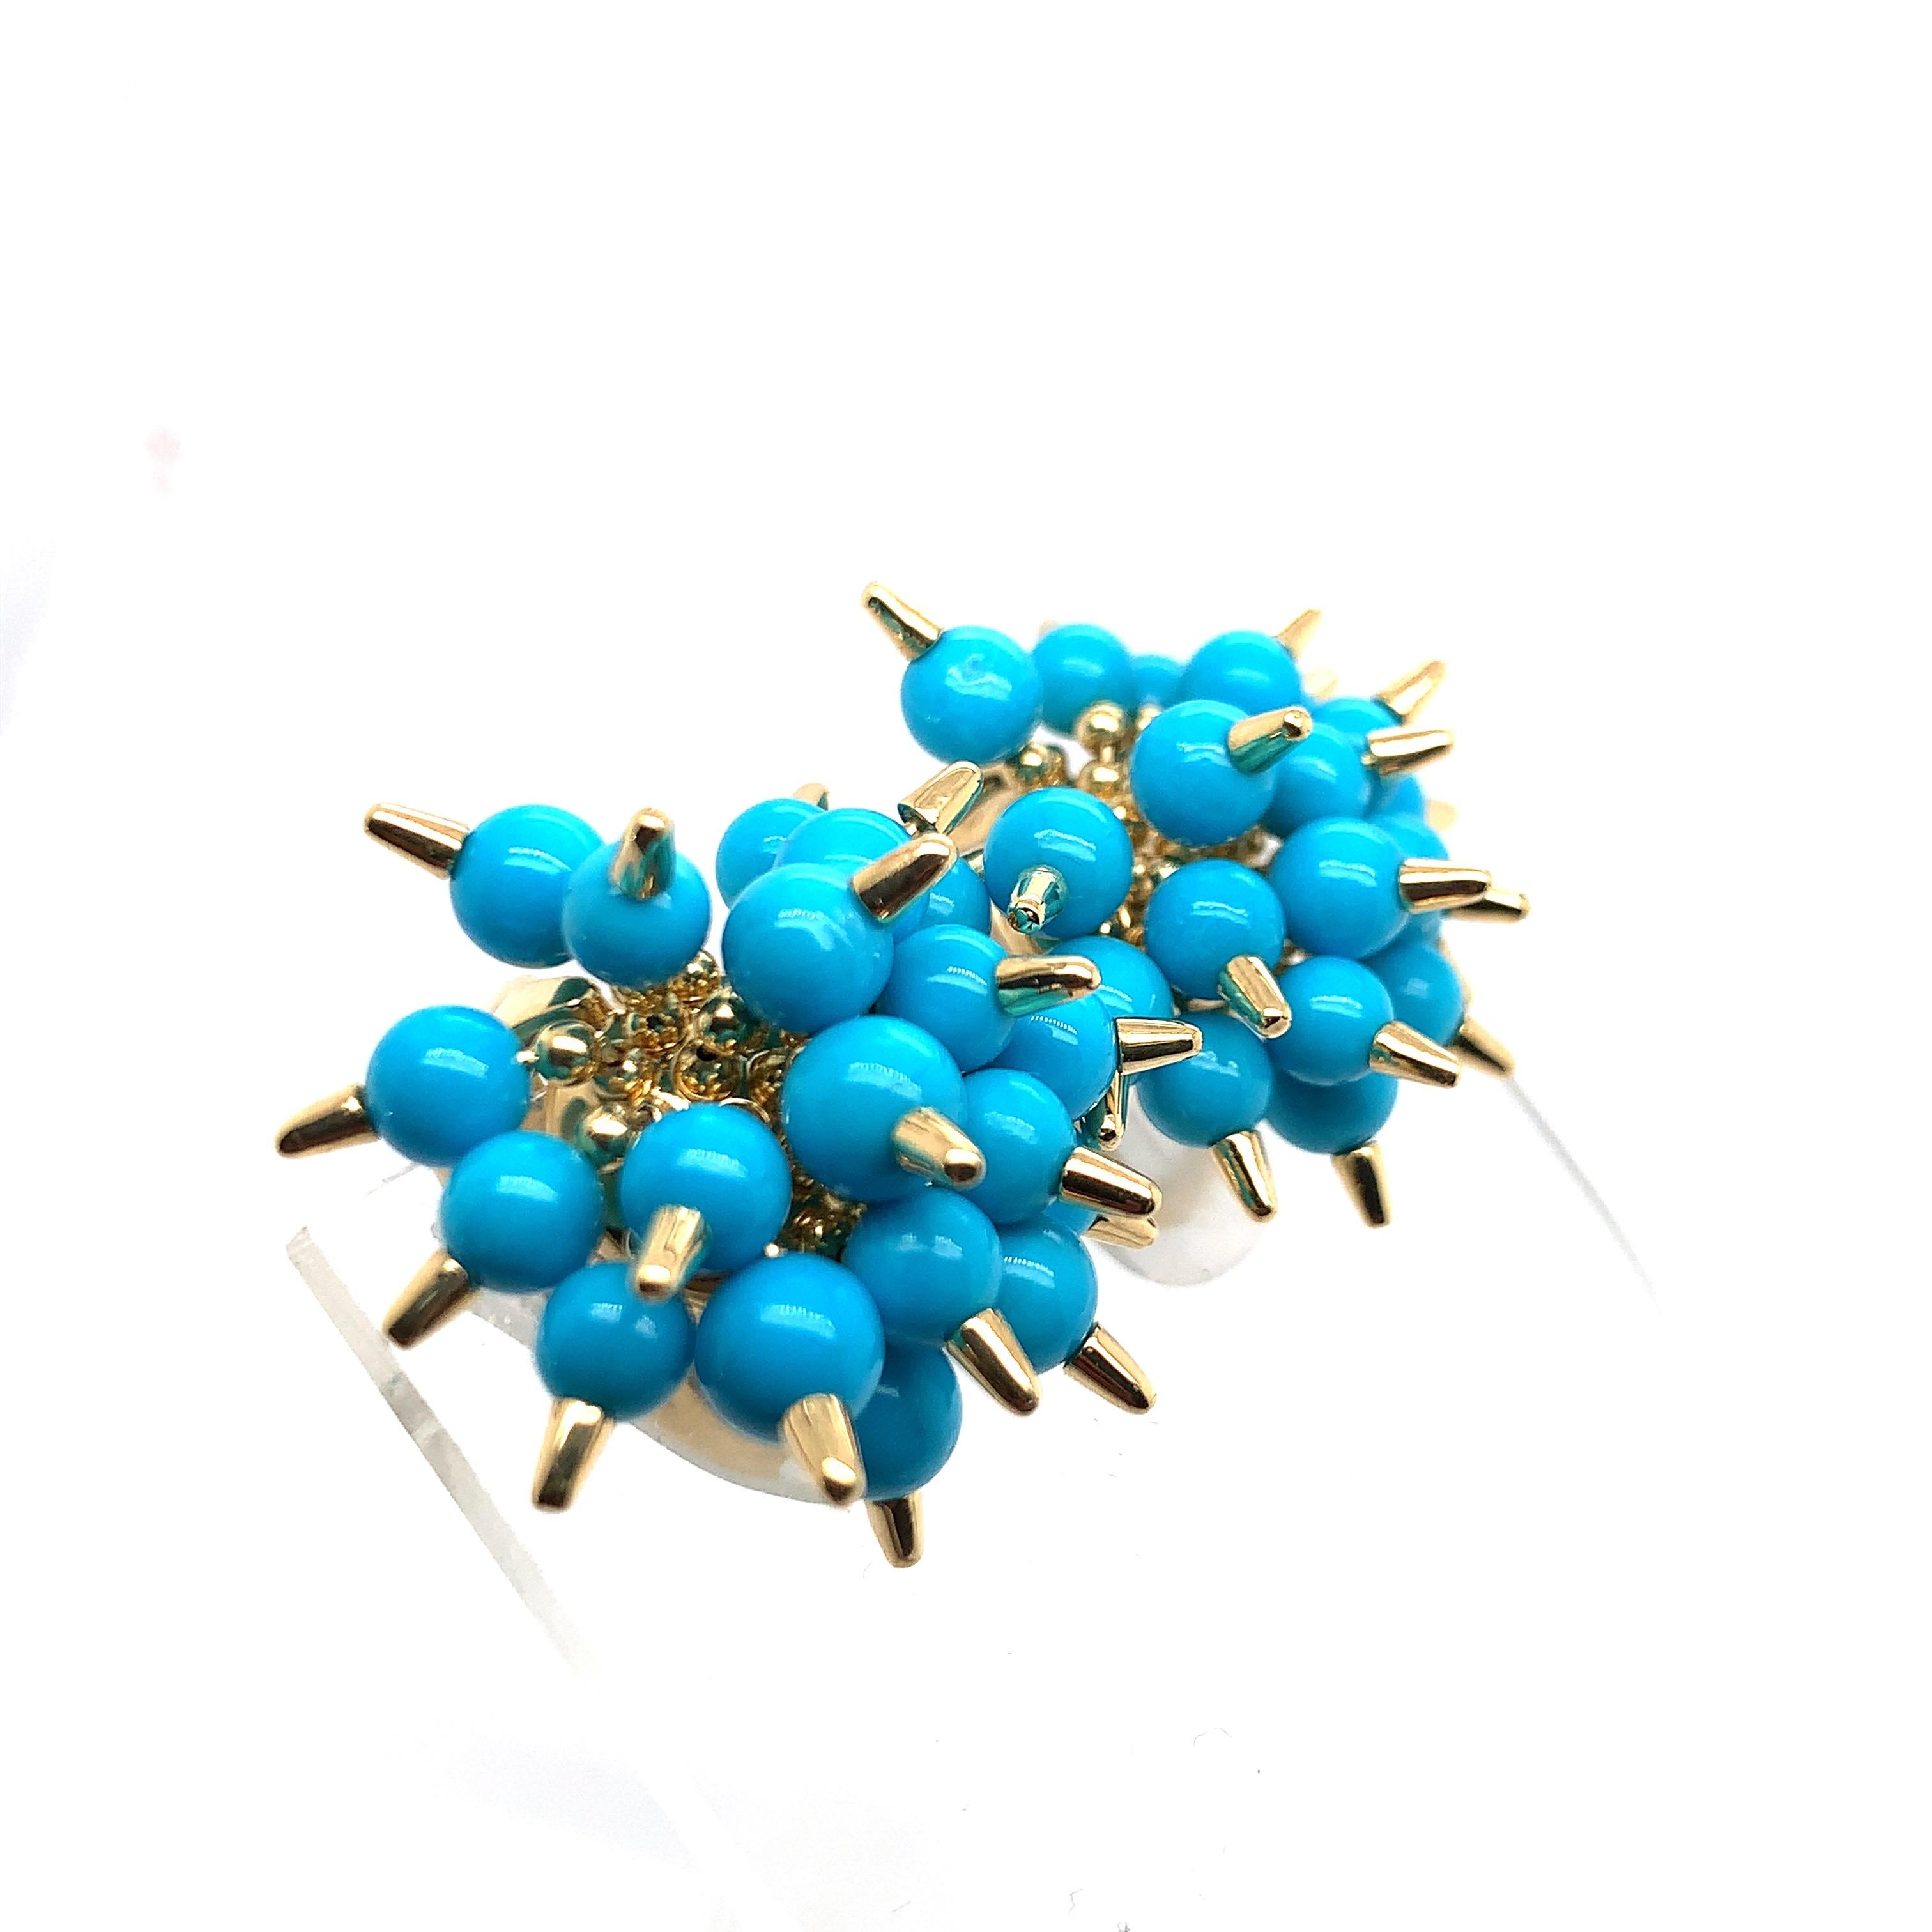 Each large circular domed form fashioned with a spiky pom-pom motif composed of articulated turquoise beads with elongated pointed centres, in 18k gold

Weight: 24.9 grams
Measuring approximately 28 mm wide
Marks: Aletto Bros, G12, 750, USA
With